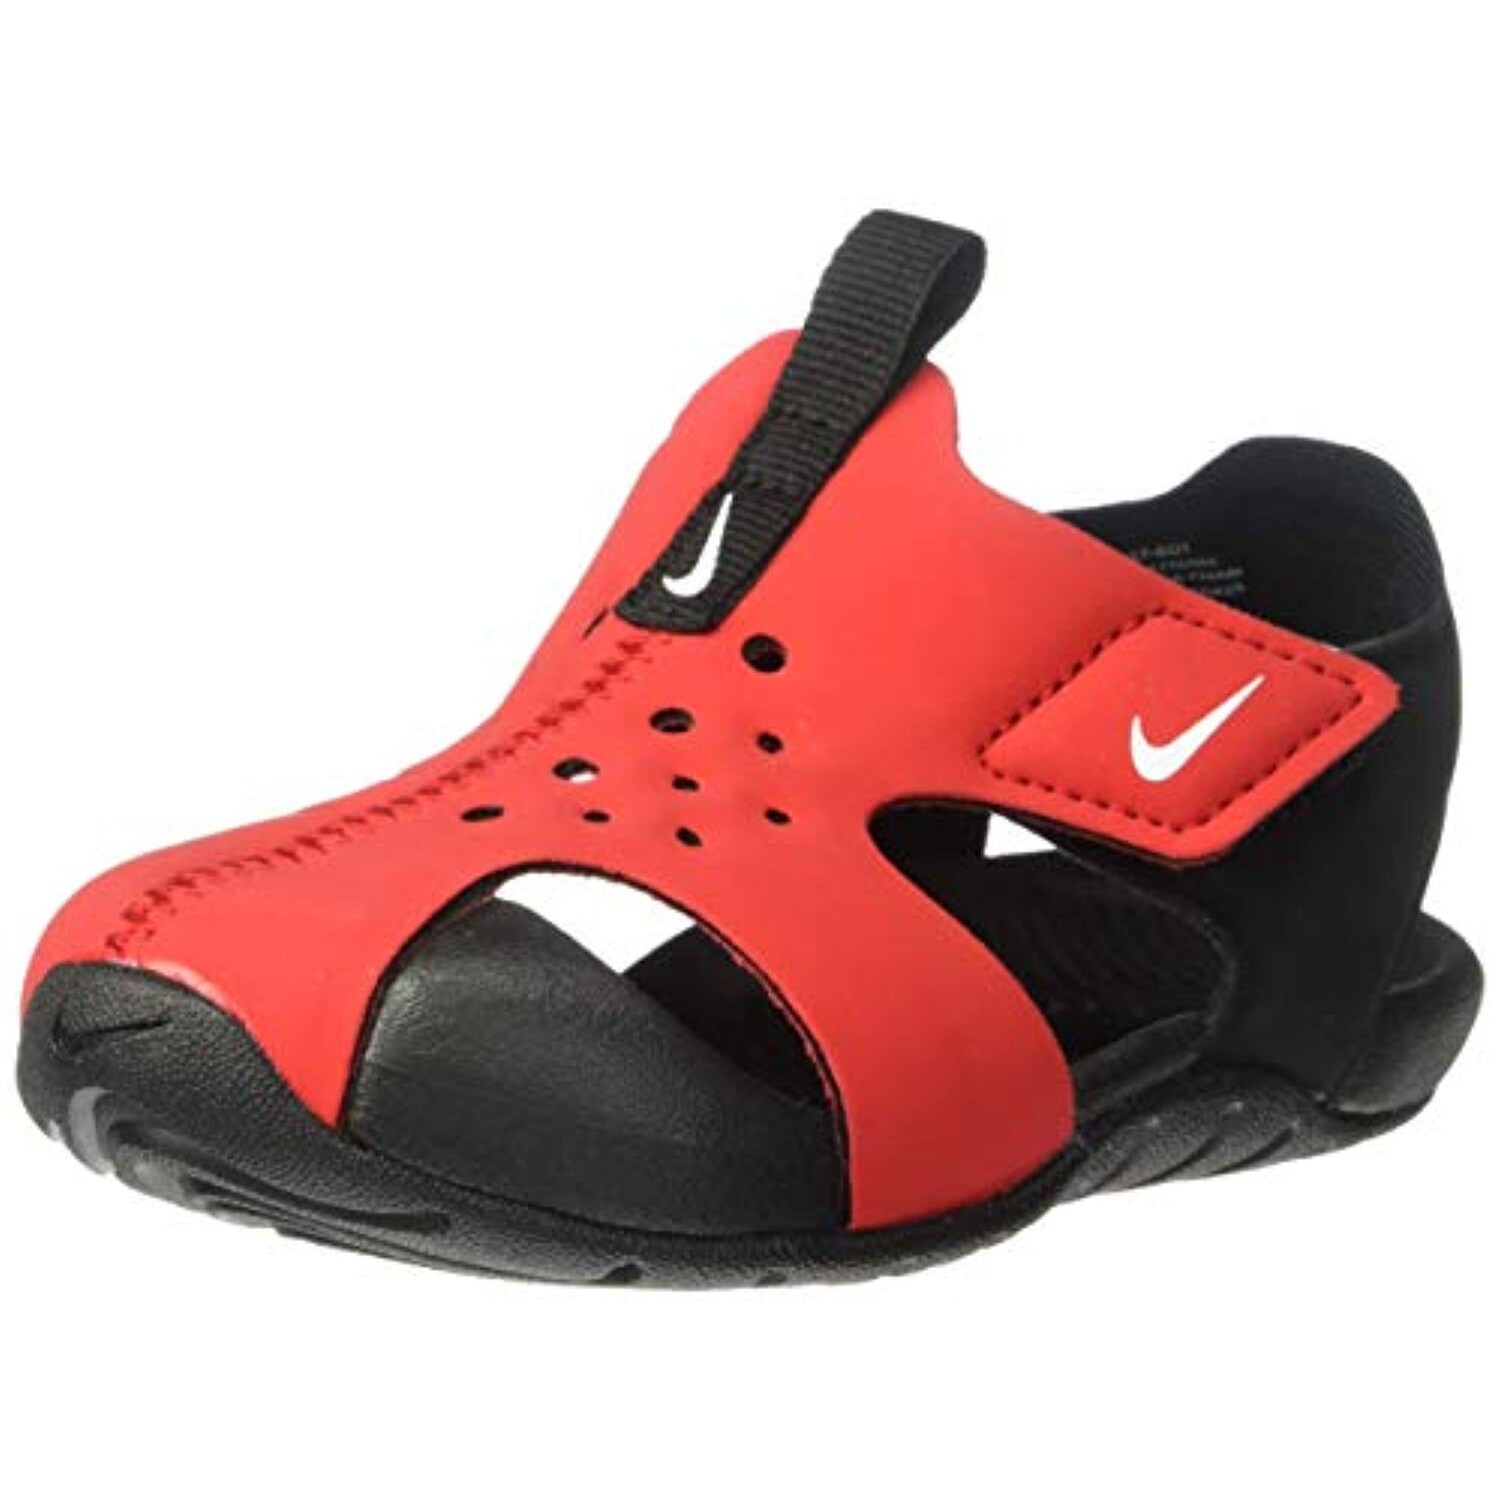 nike sandals size 5c